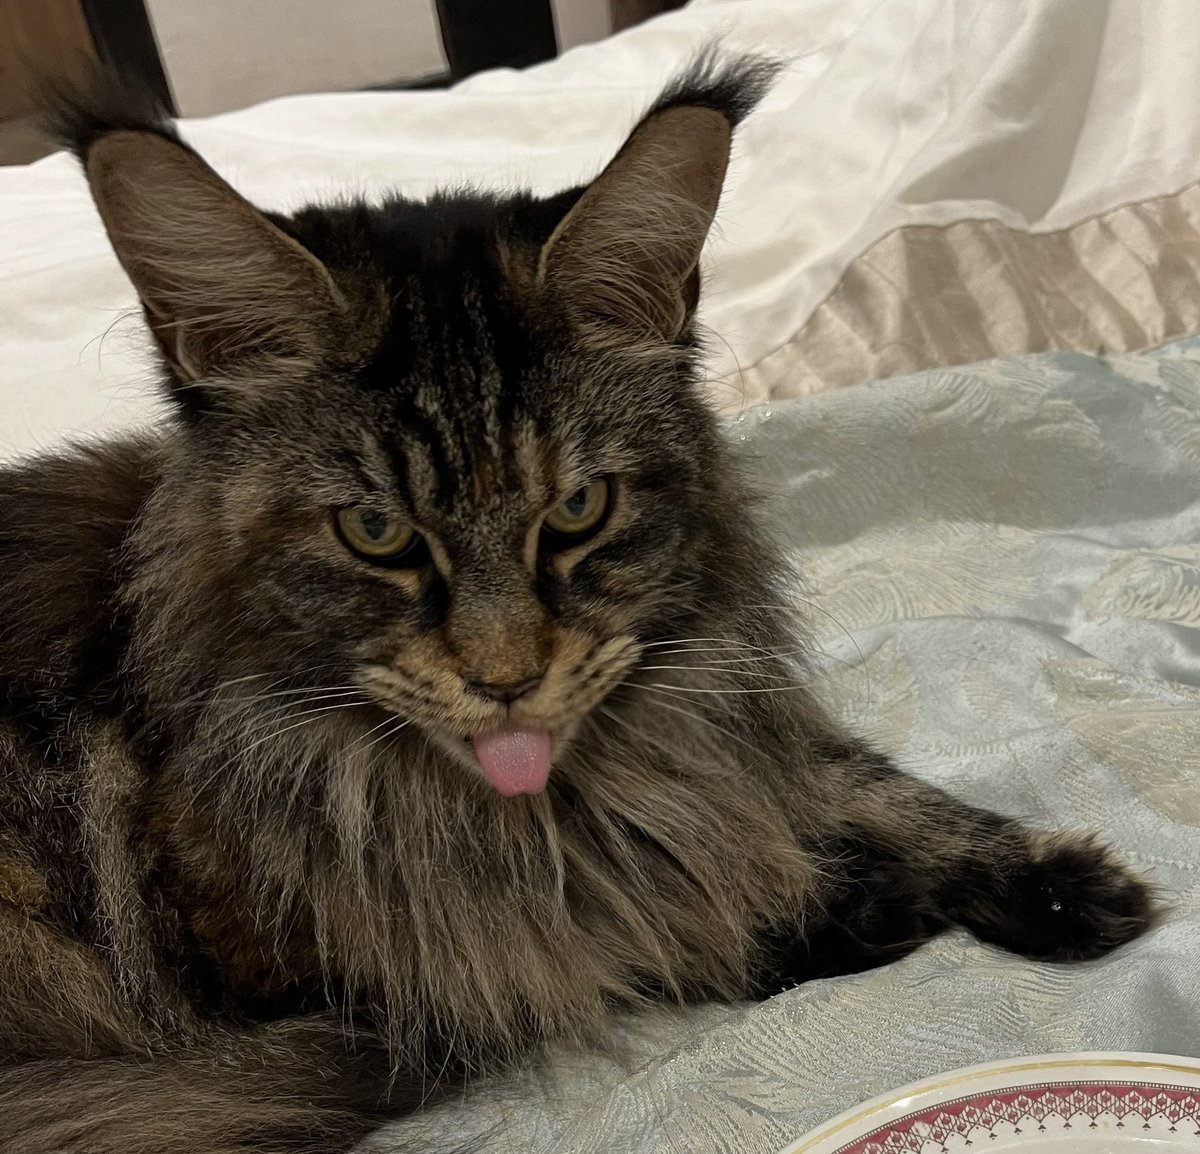 It’s #HaiTimTuesday and we’re thinking of @tkbgamer and @timzmom and sending purrs from Evie and I 😺 As it’s also #TongueOutTuesday, we chose this photo!